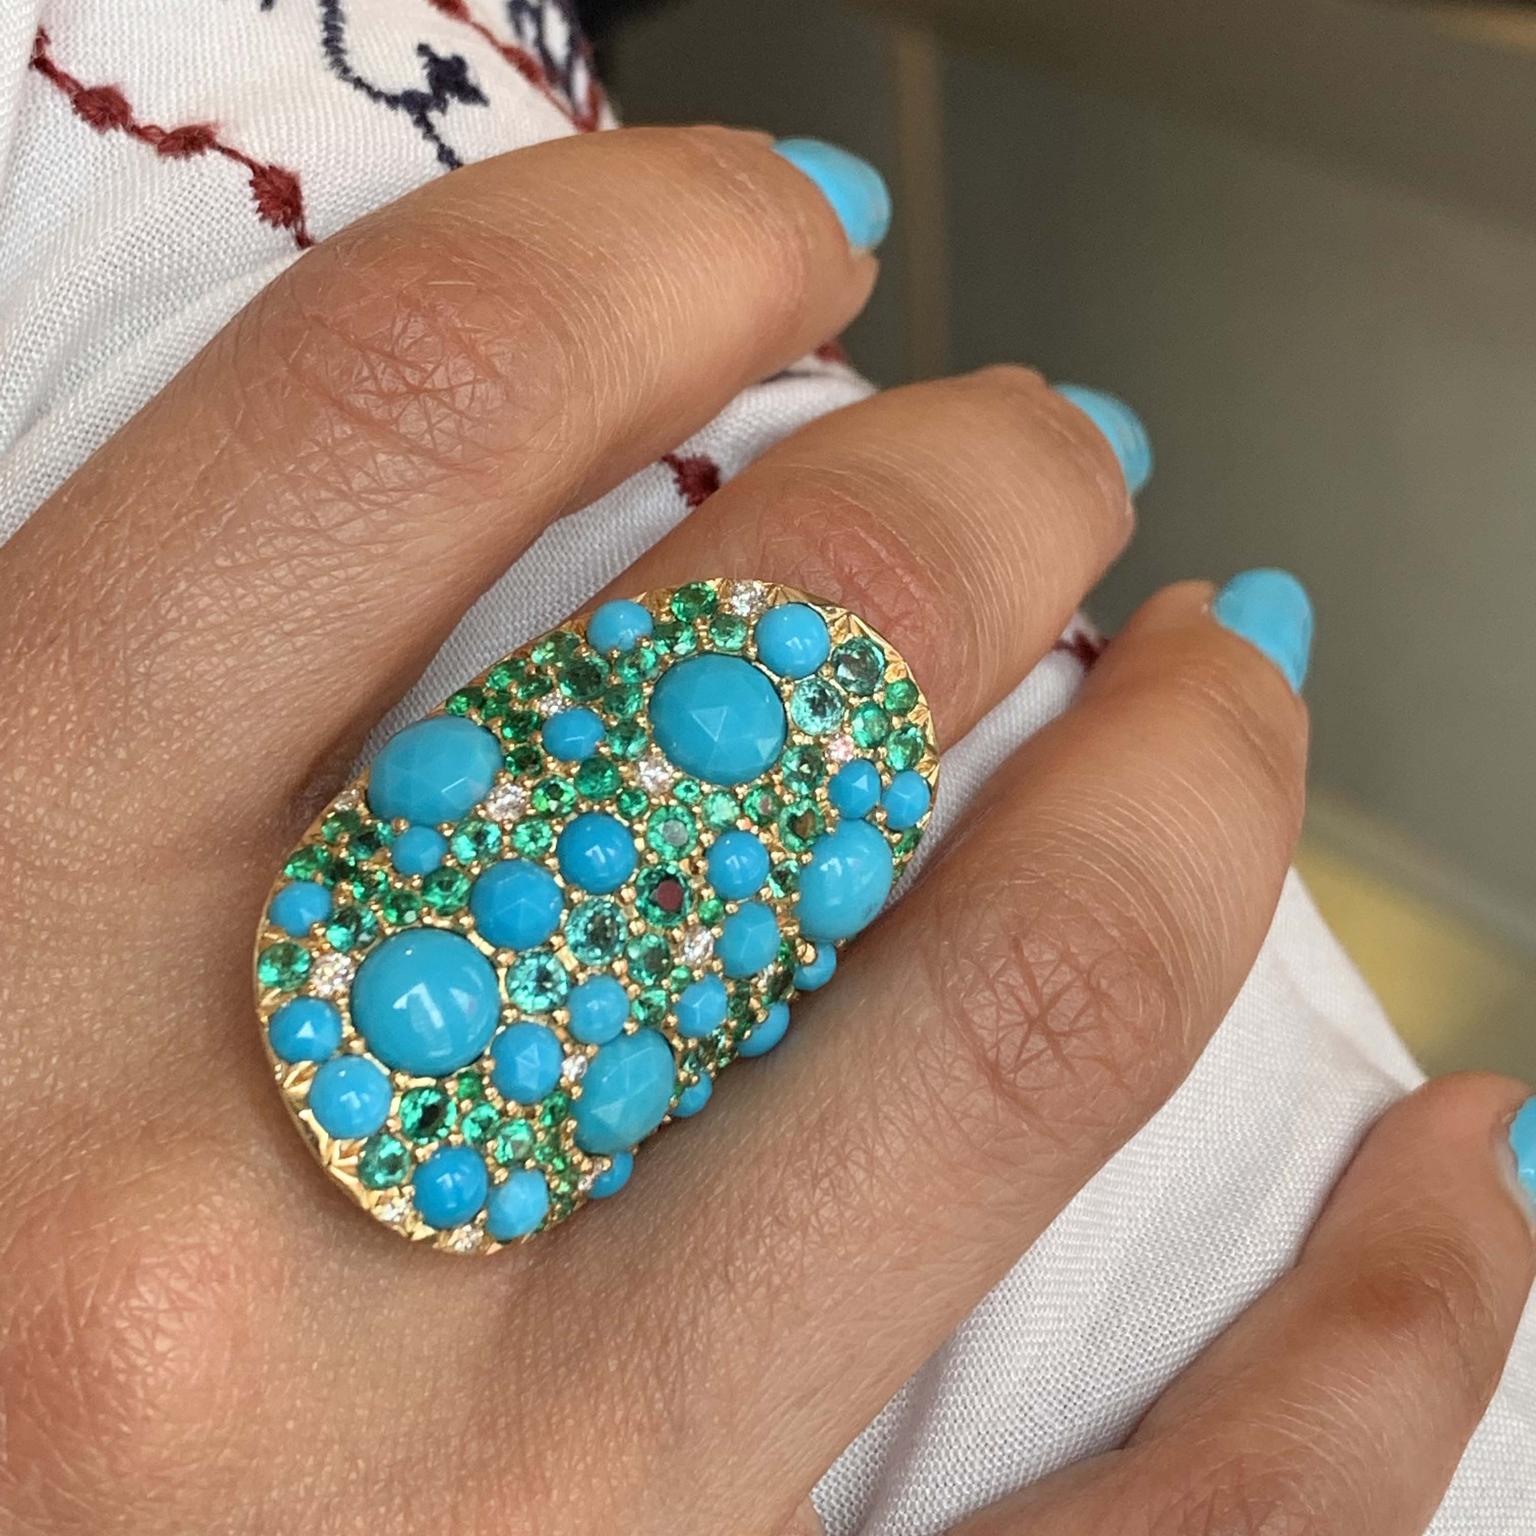 Vault ring from Robinson Pelham with turquoise